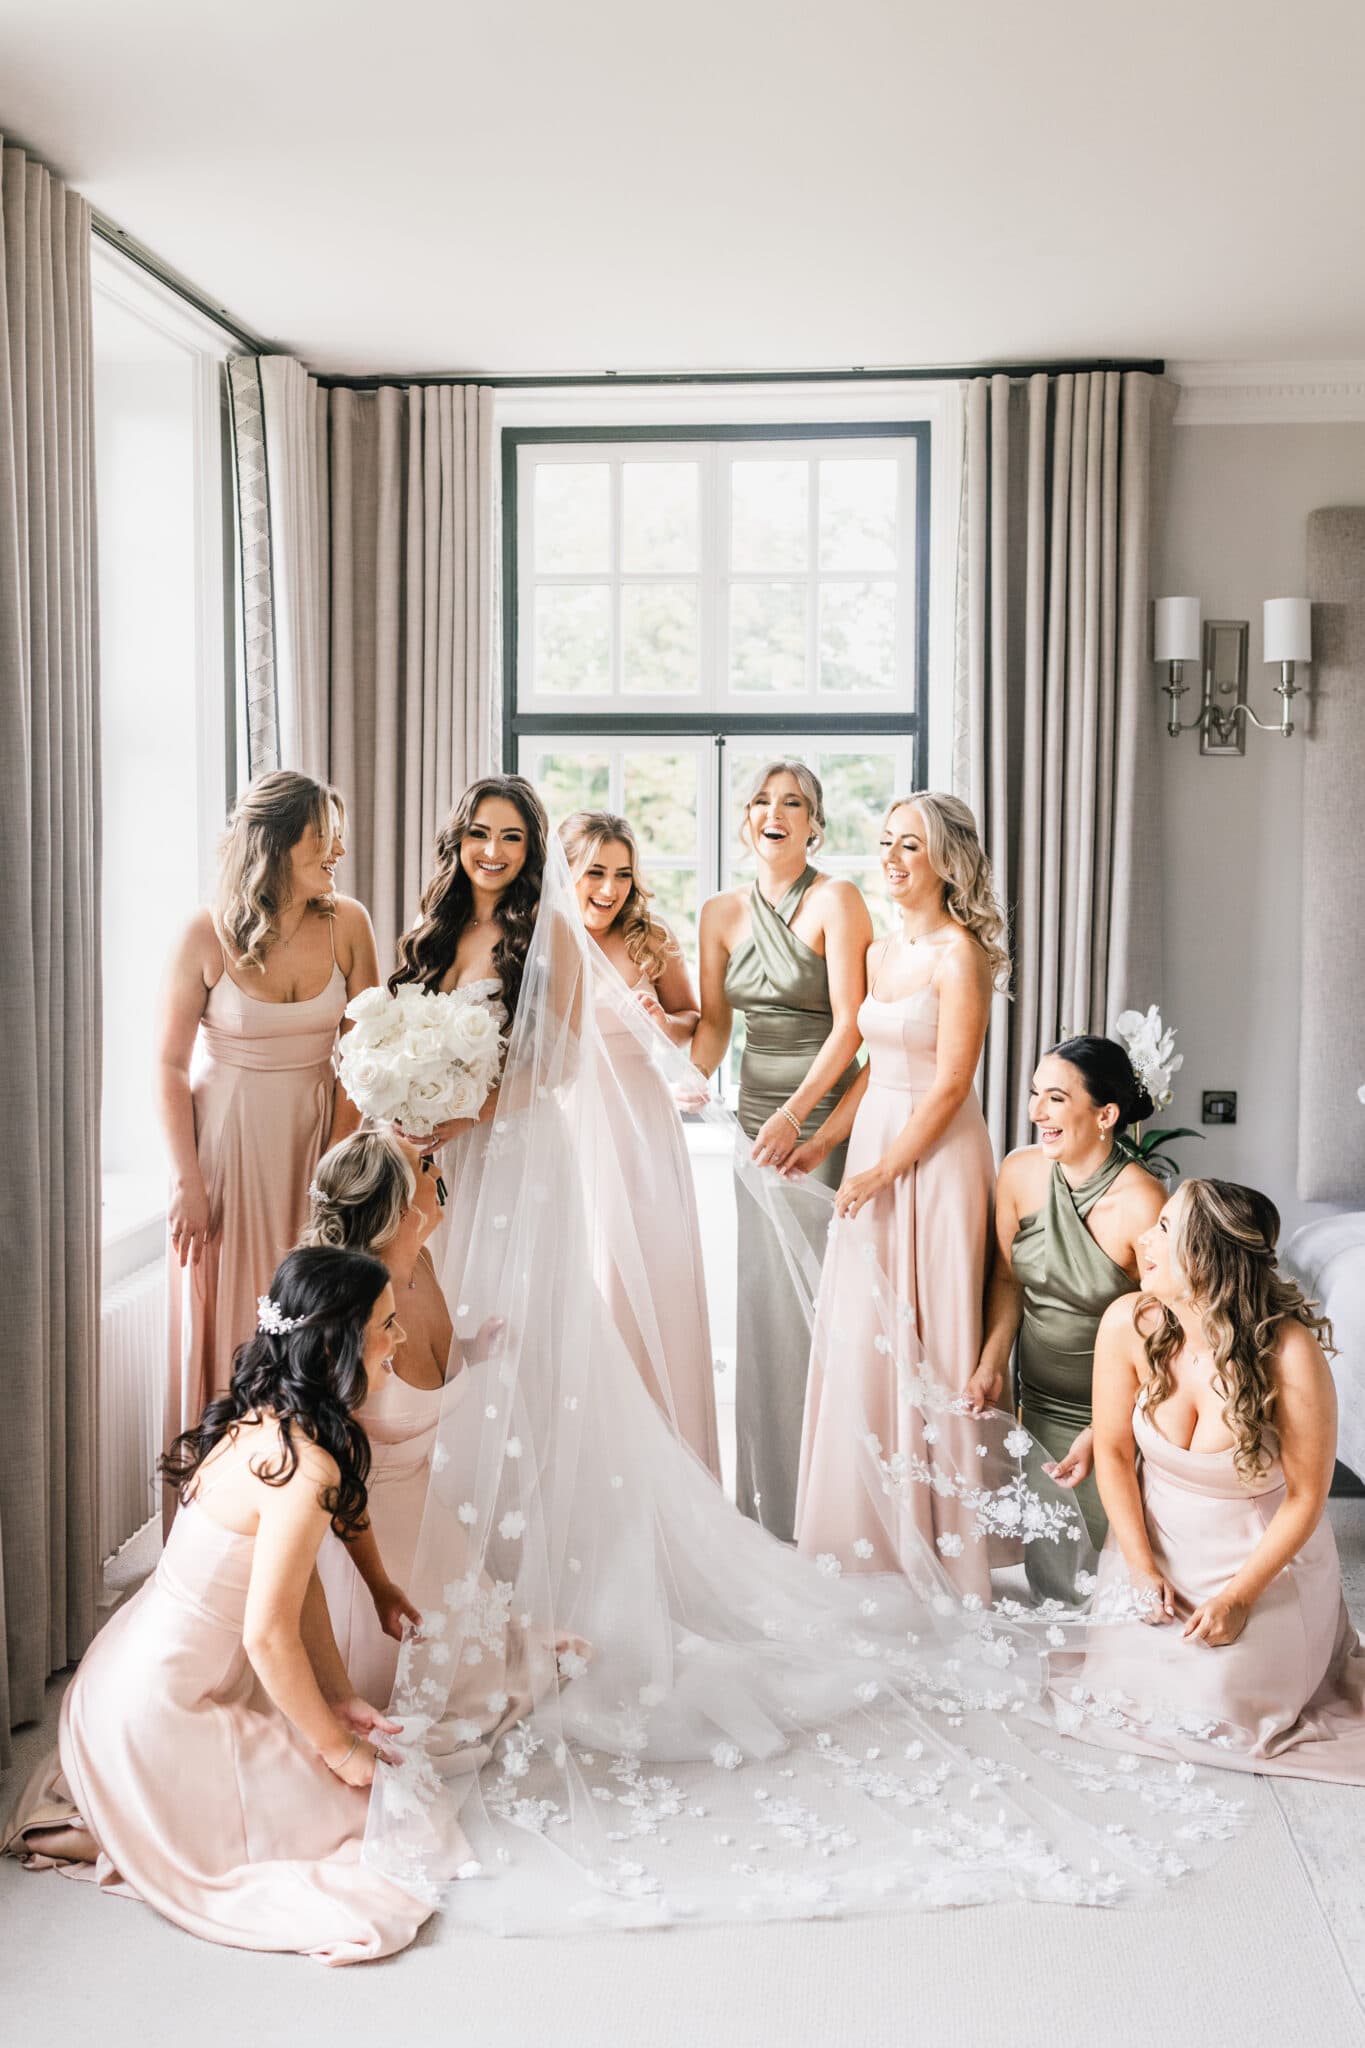 A bride in a white gown with a veil, surrounded by bridesmaids in soft pink dresses, sharing a joyful moment in a stylish room with elegant curtains and soft lighting.